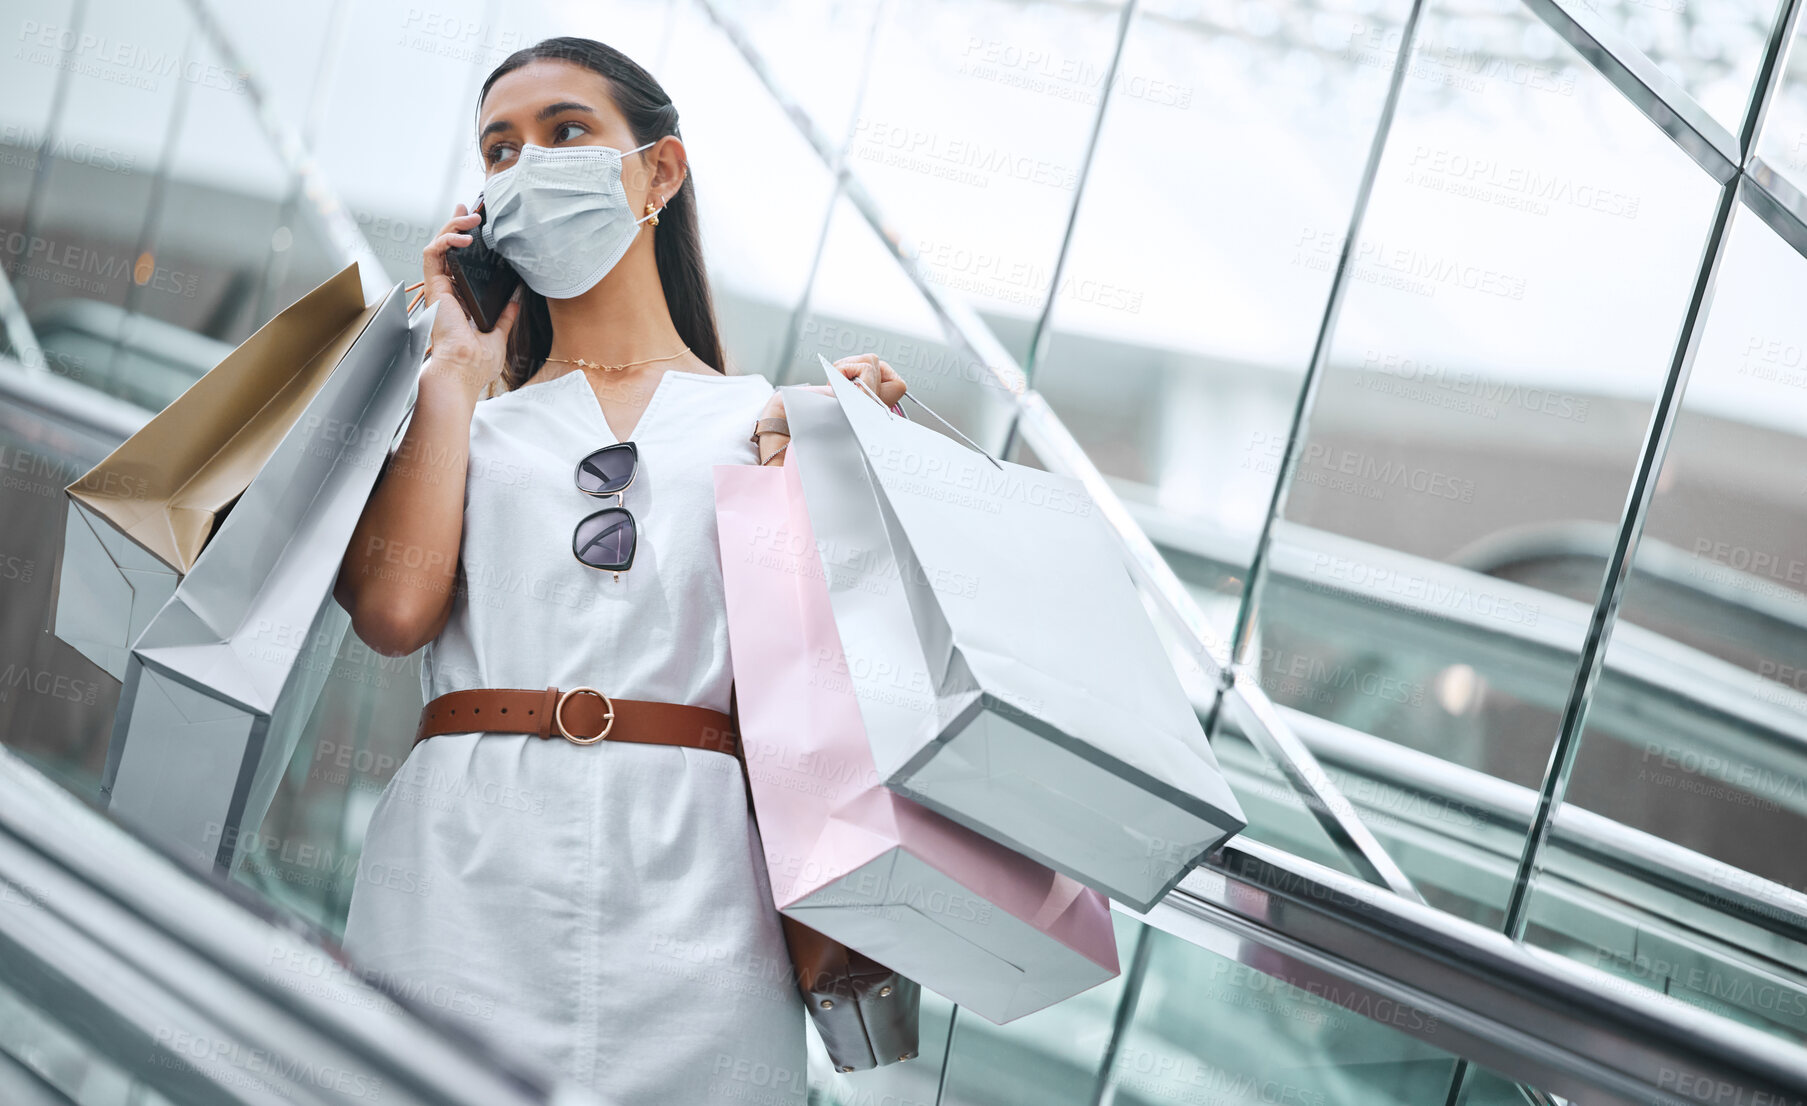 Buy stock photo One young mixed race woman wearing a medical face mask and talking on a cellphone while on an escalator after a shopping spree. Fashionable hispanic carrying retail bags after buying in a mall during Covid-19 pandemic